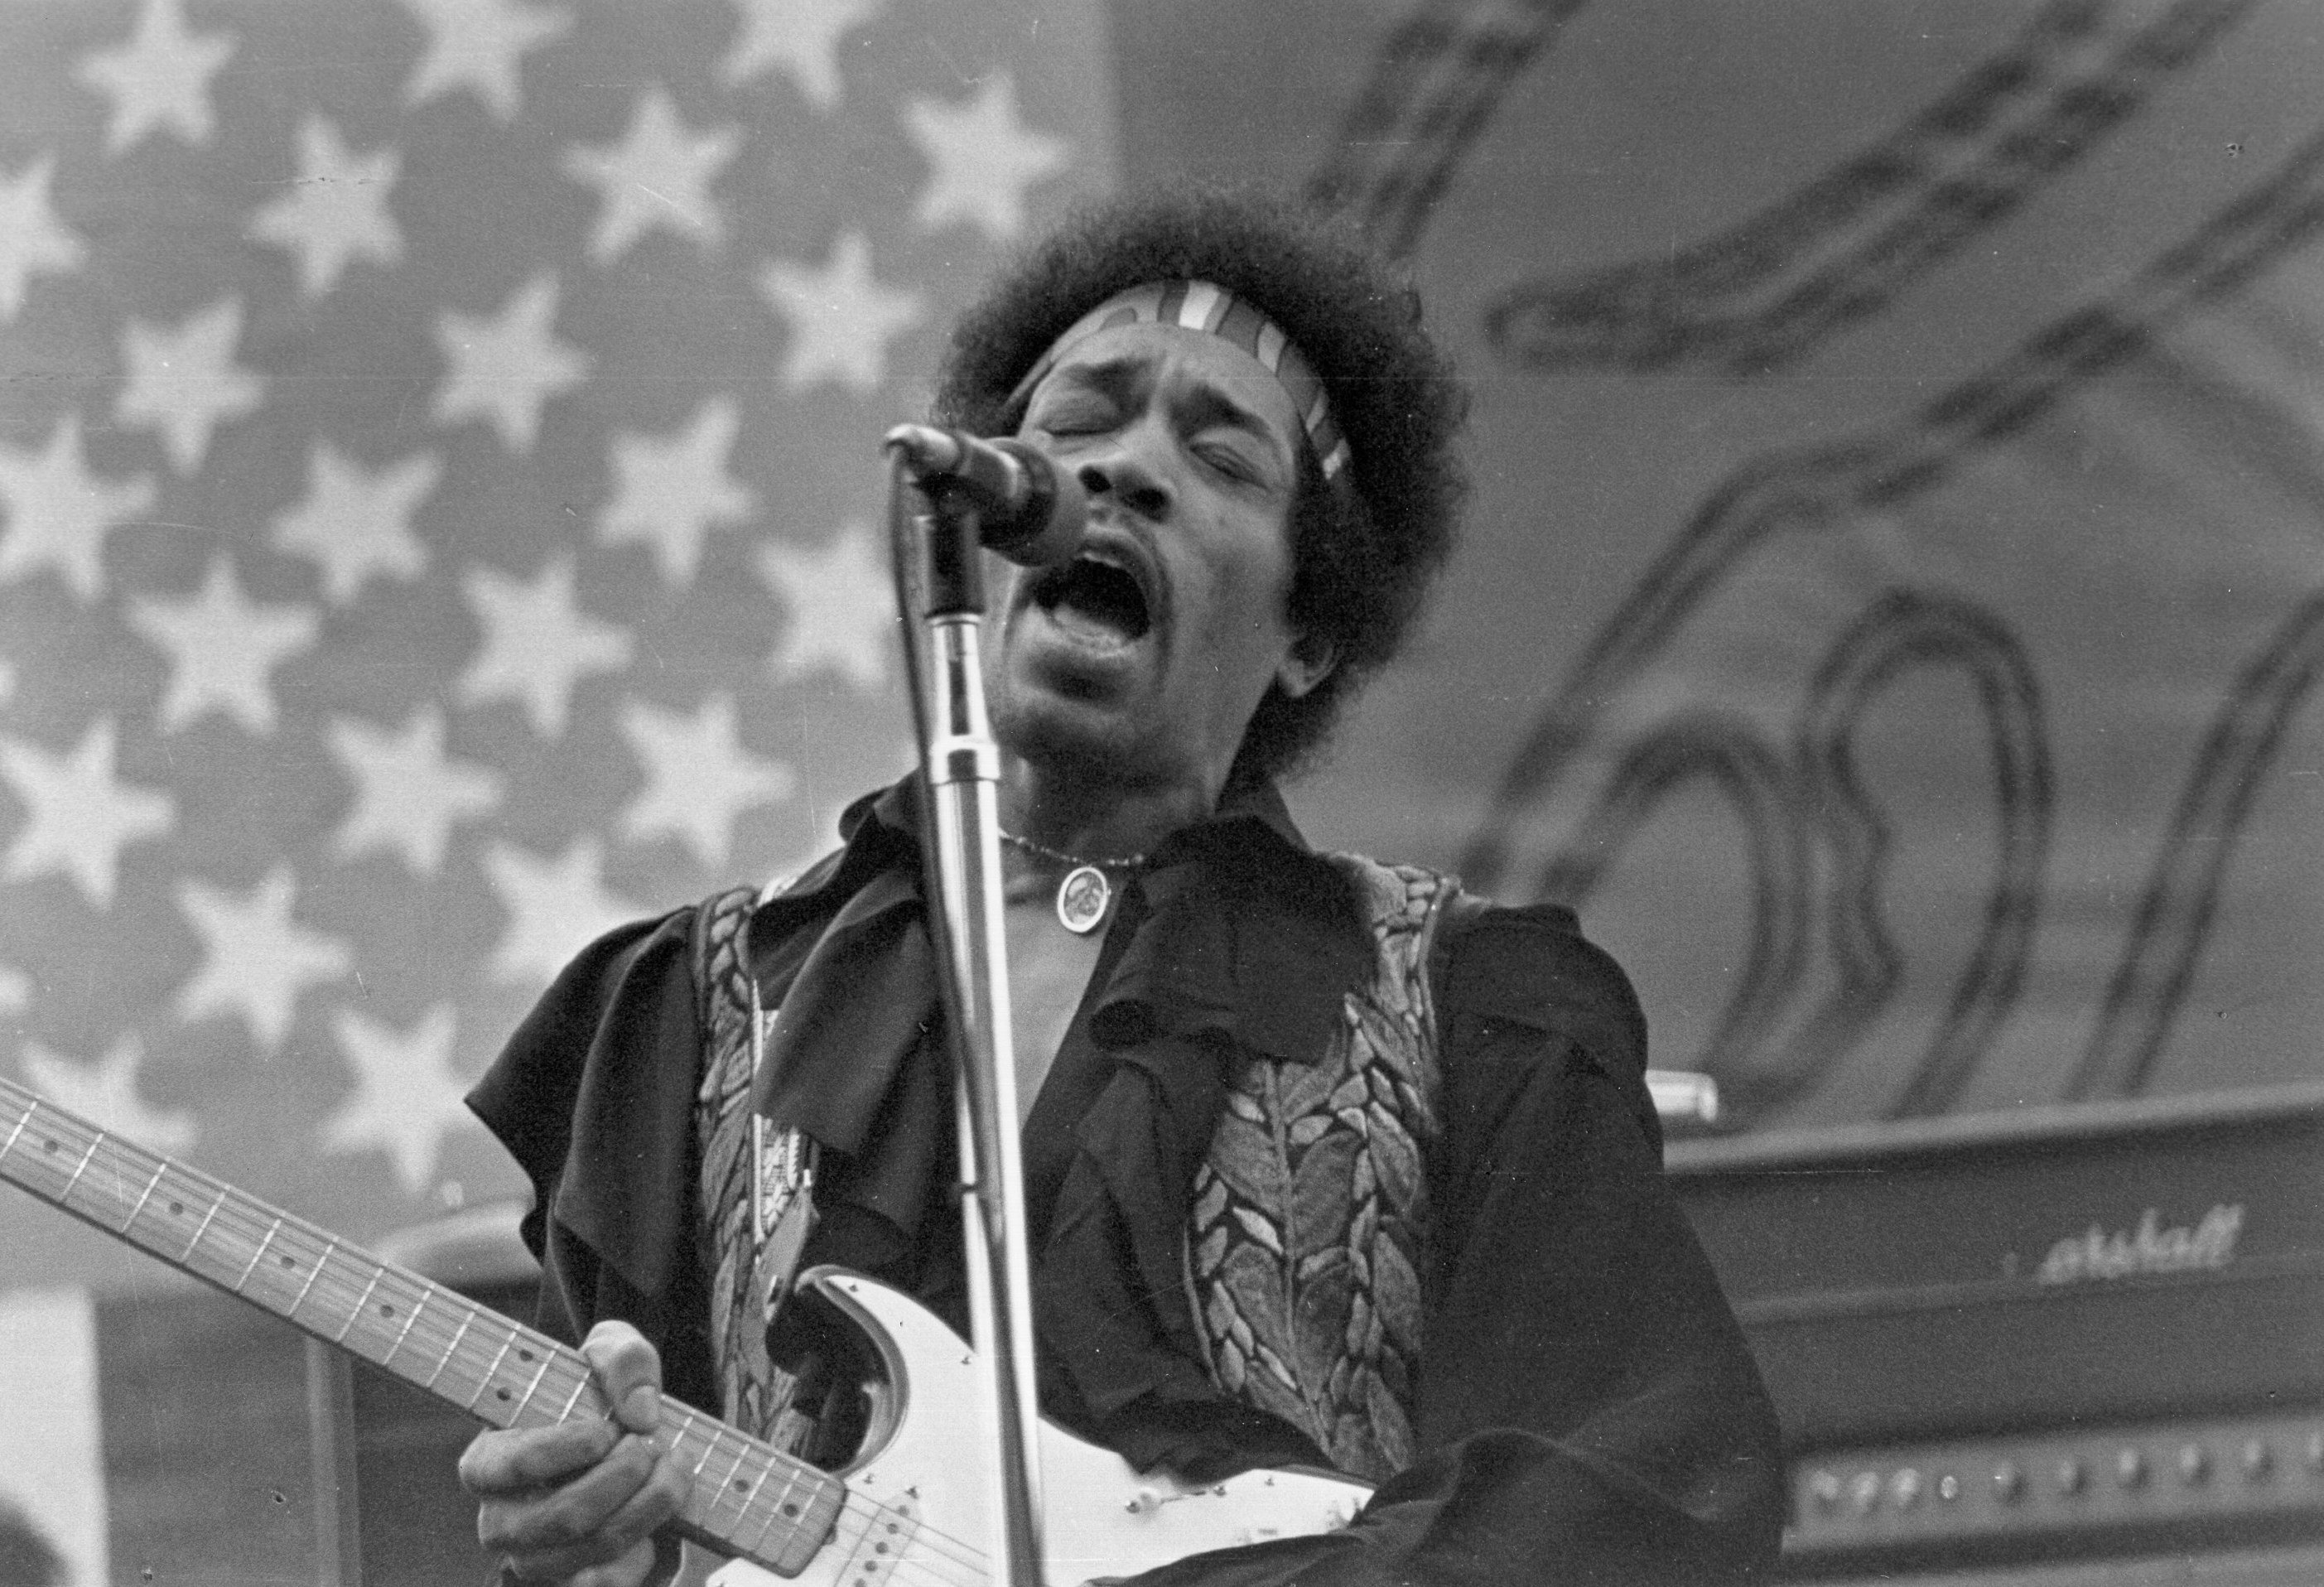 Jimi Hendrix, who didn't write his first single, singing into a microphone